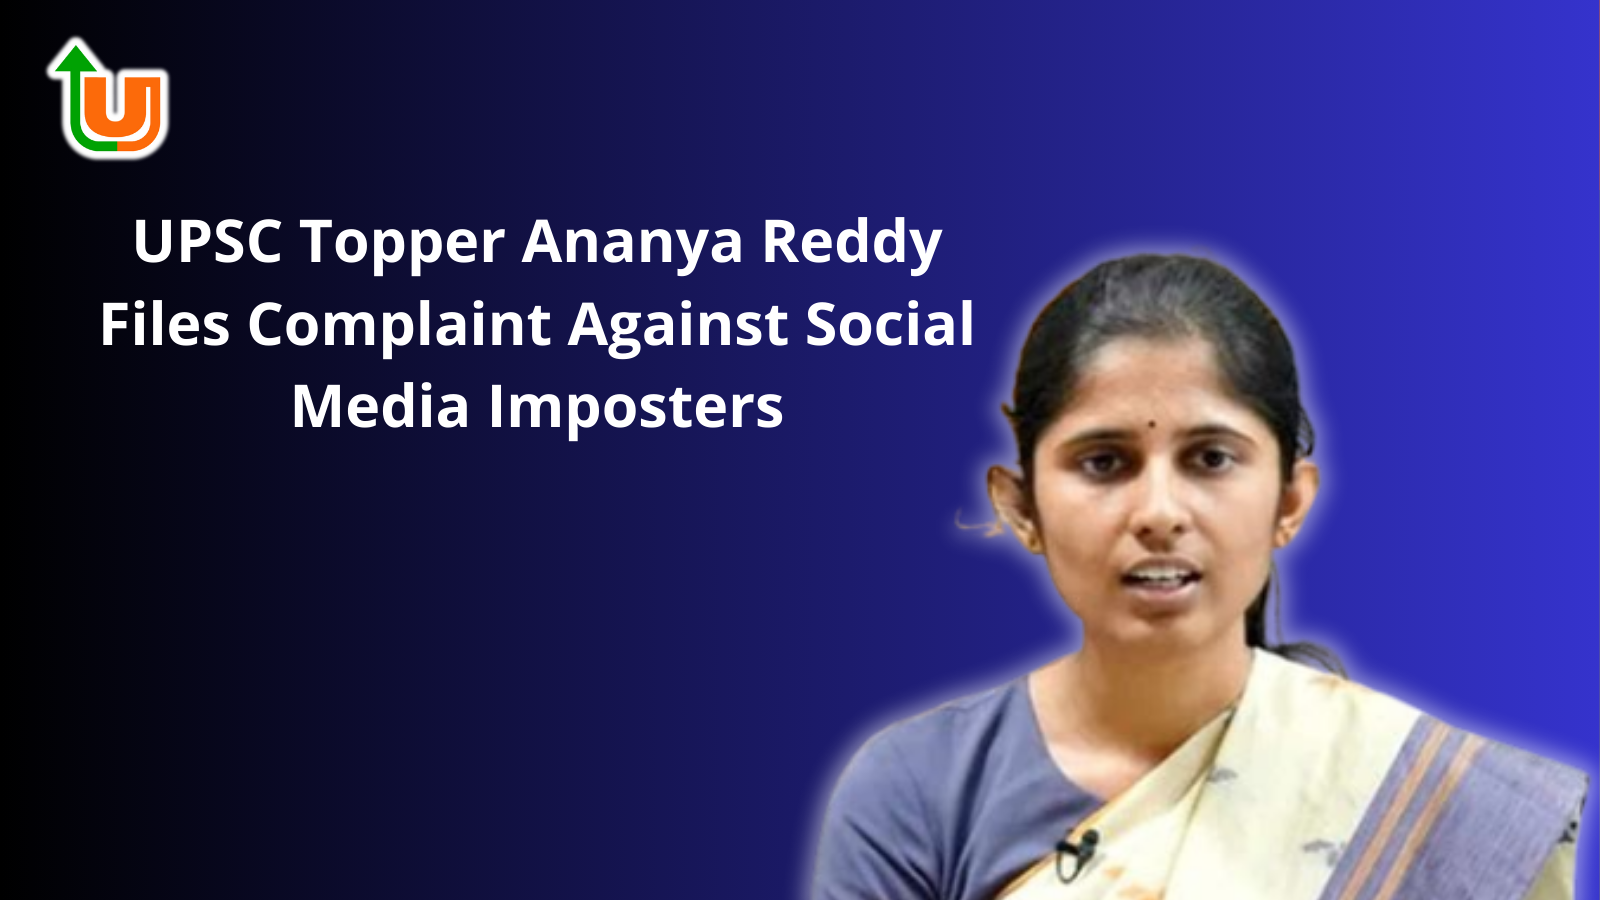 UPSC Topper Ananya Reddy Files Complaint Against Social Media Imposters